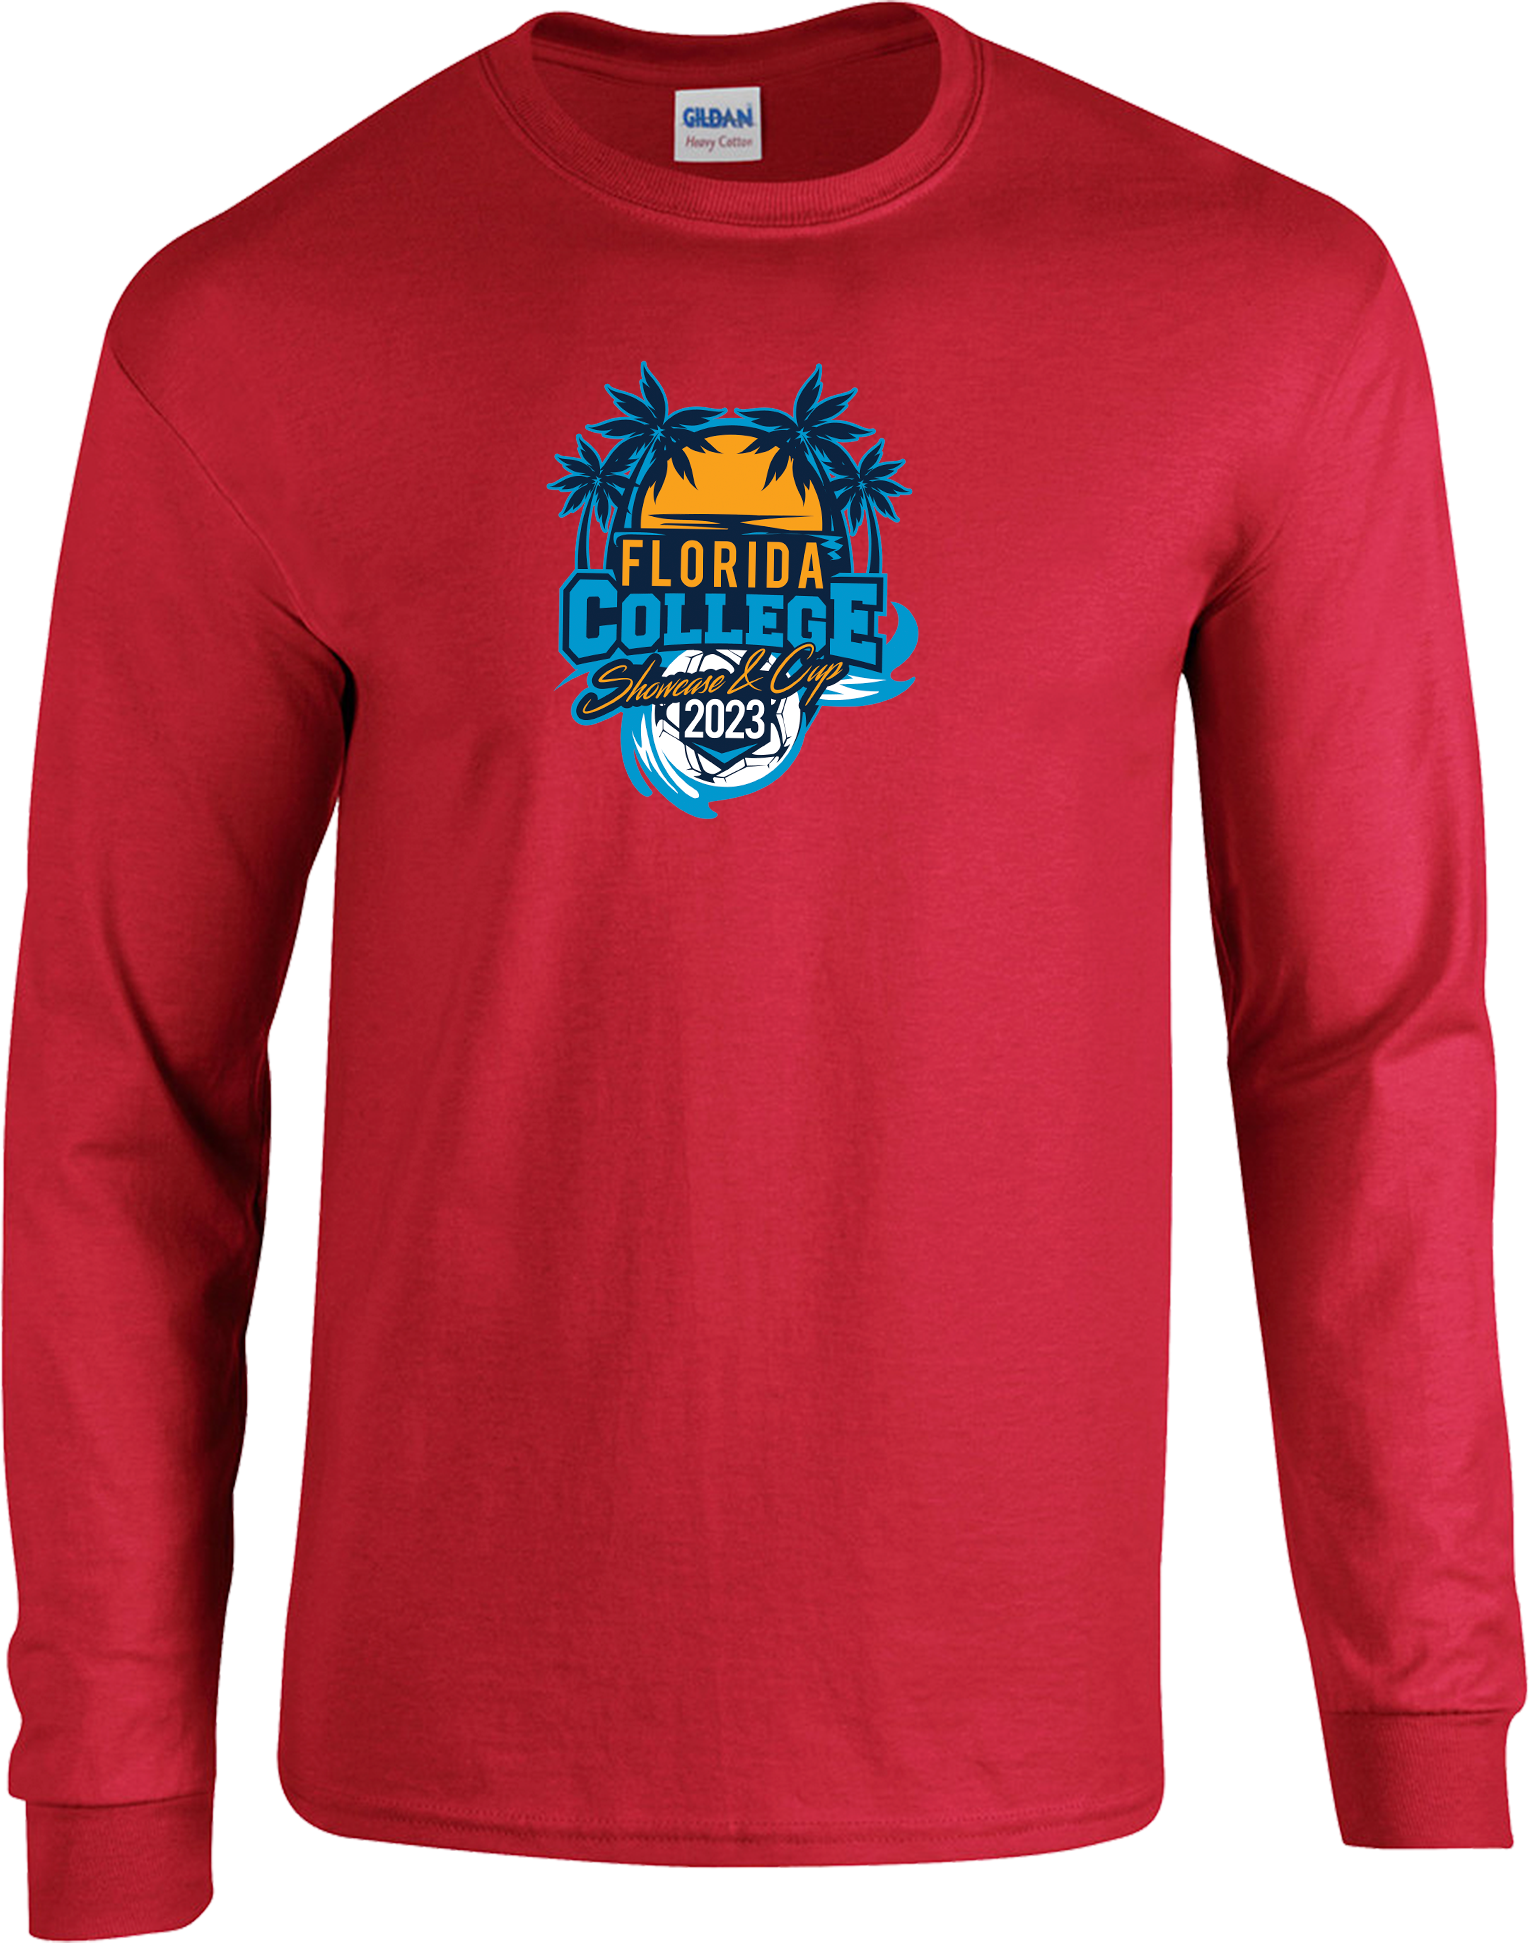 LONG SLEEVES - 2023 Florida College Showcase and Cup